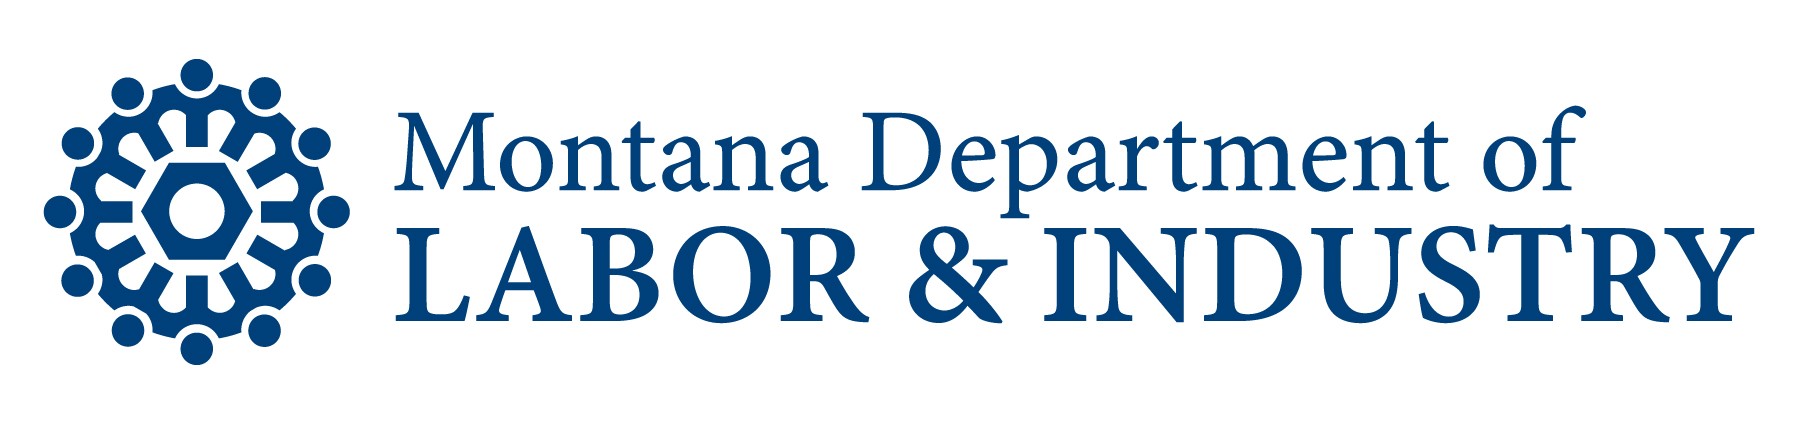 Montana Department of Labor & Industry